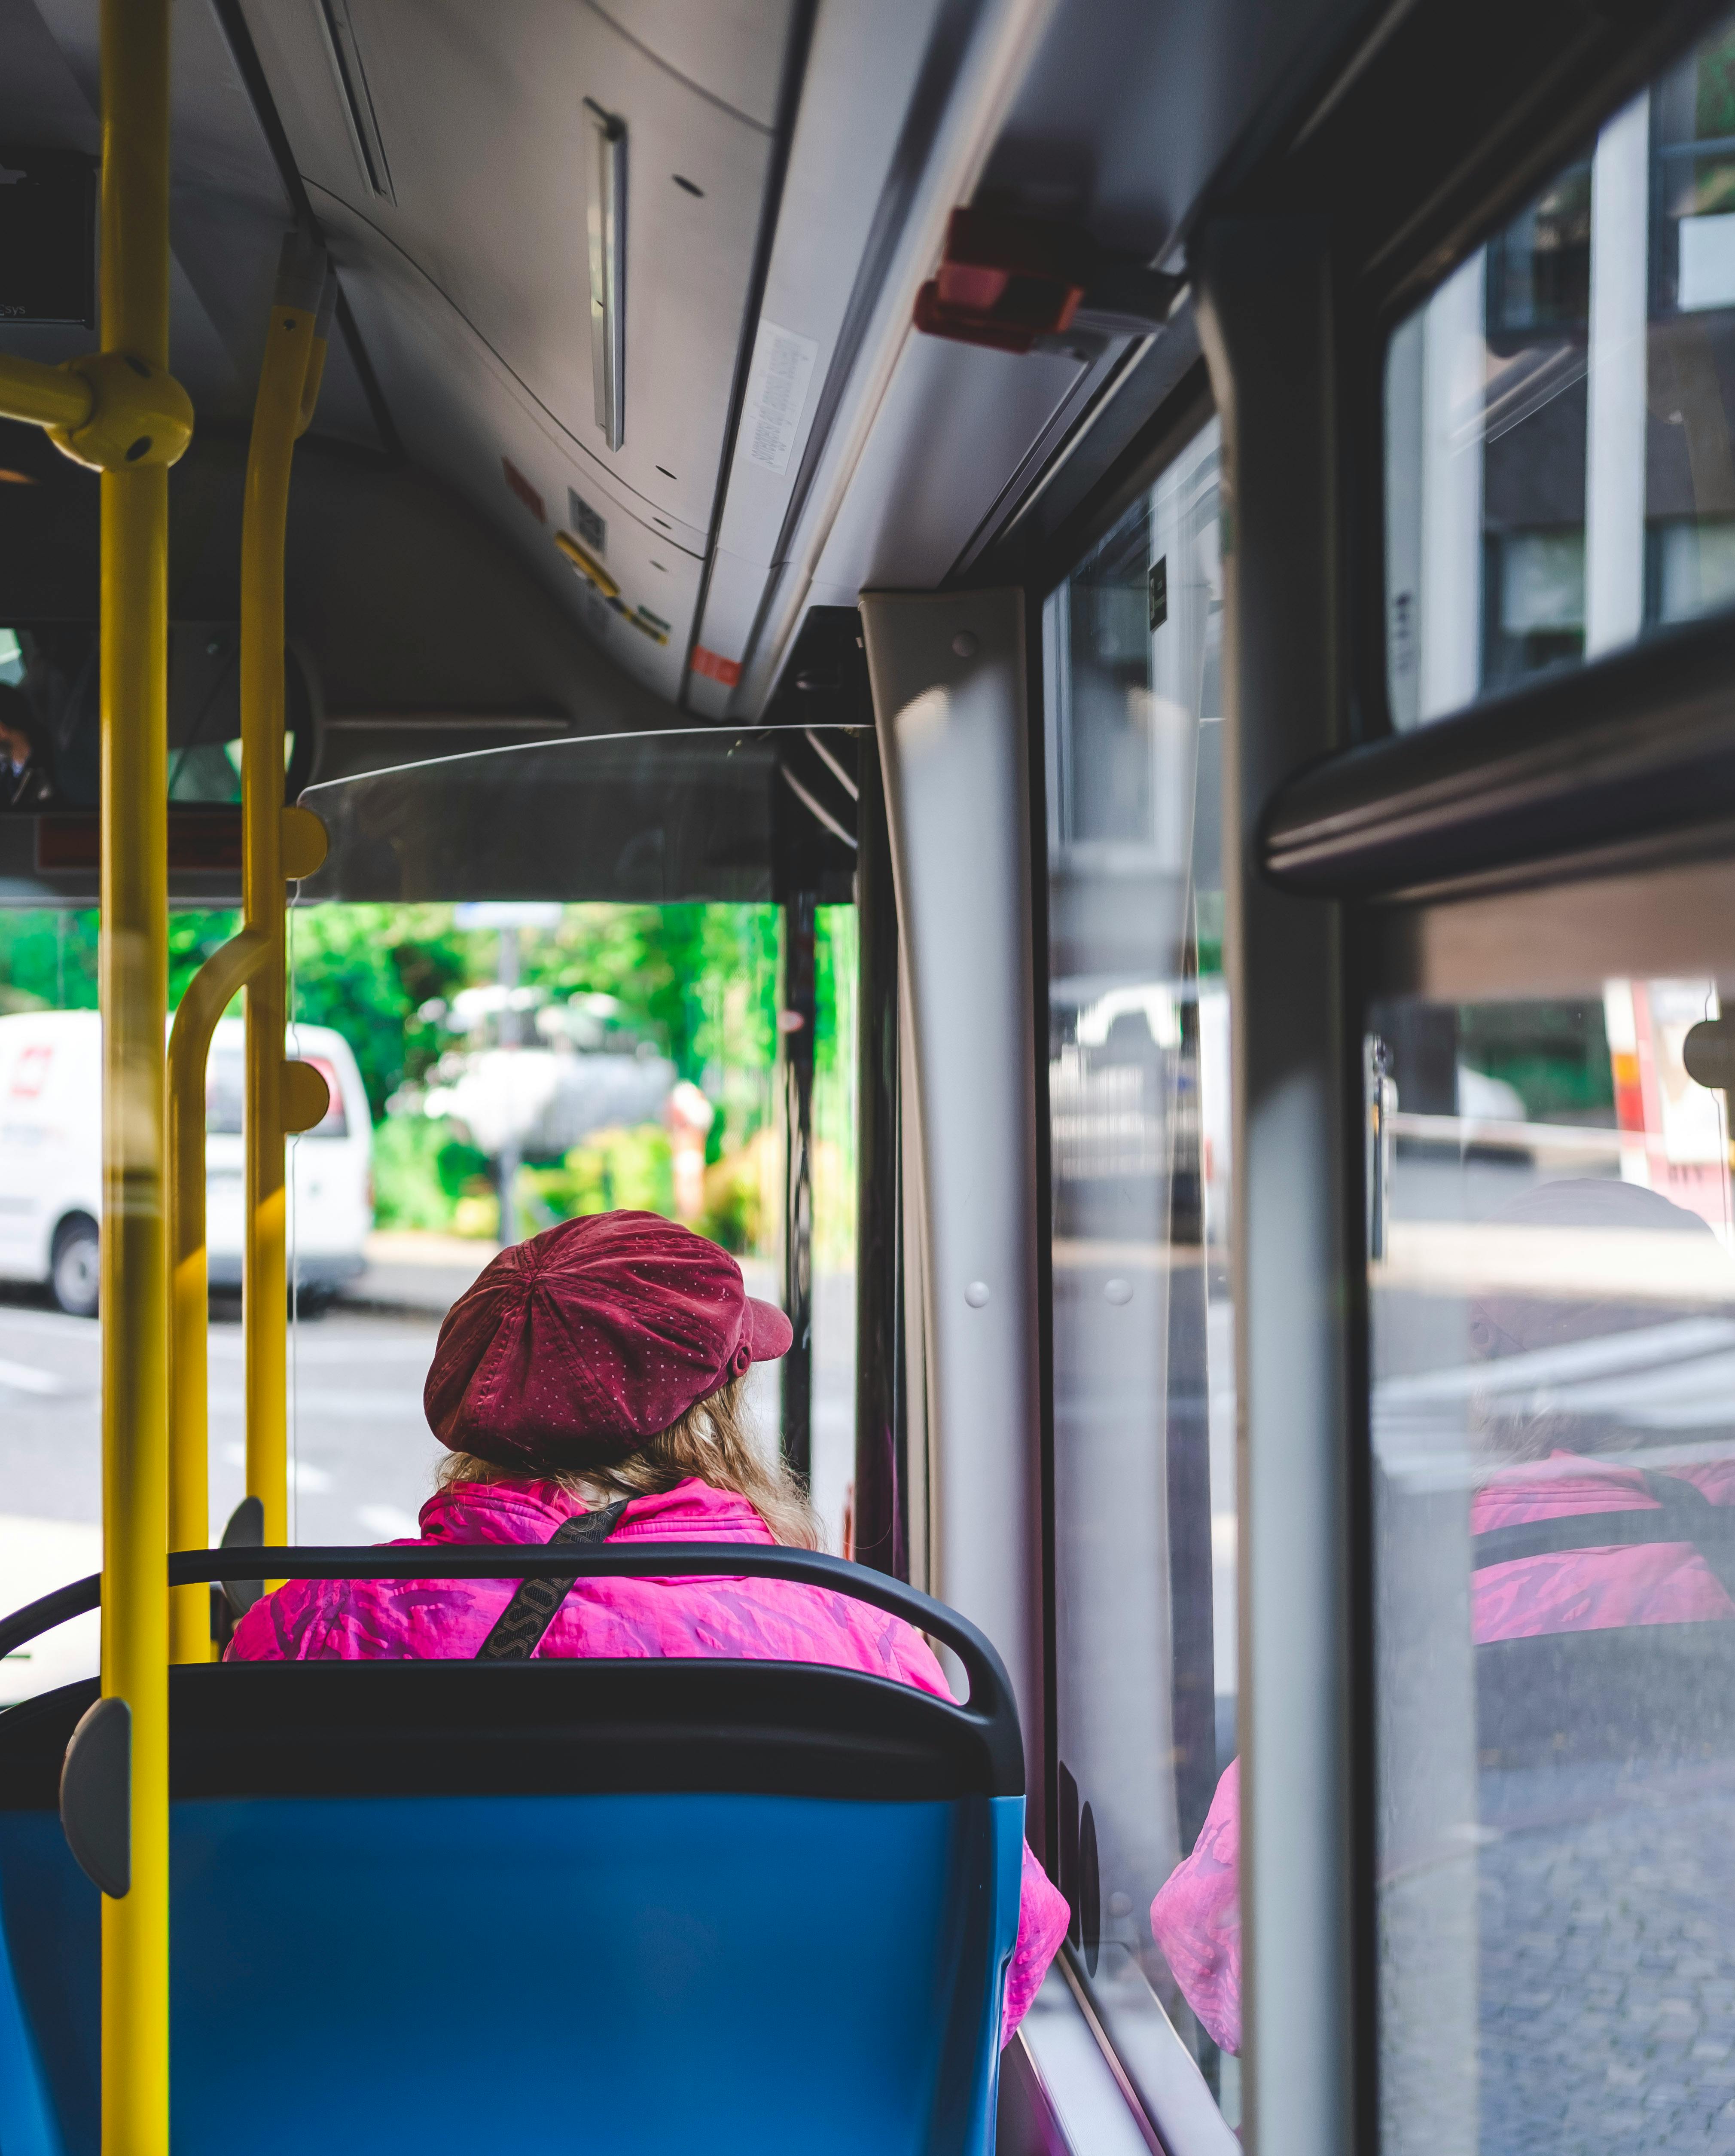 A woman helps an elderly woman to a seat on a crowded bus | Source: Pexels